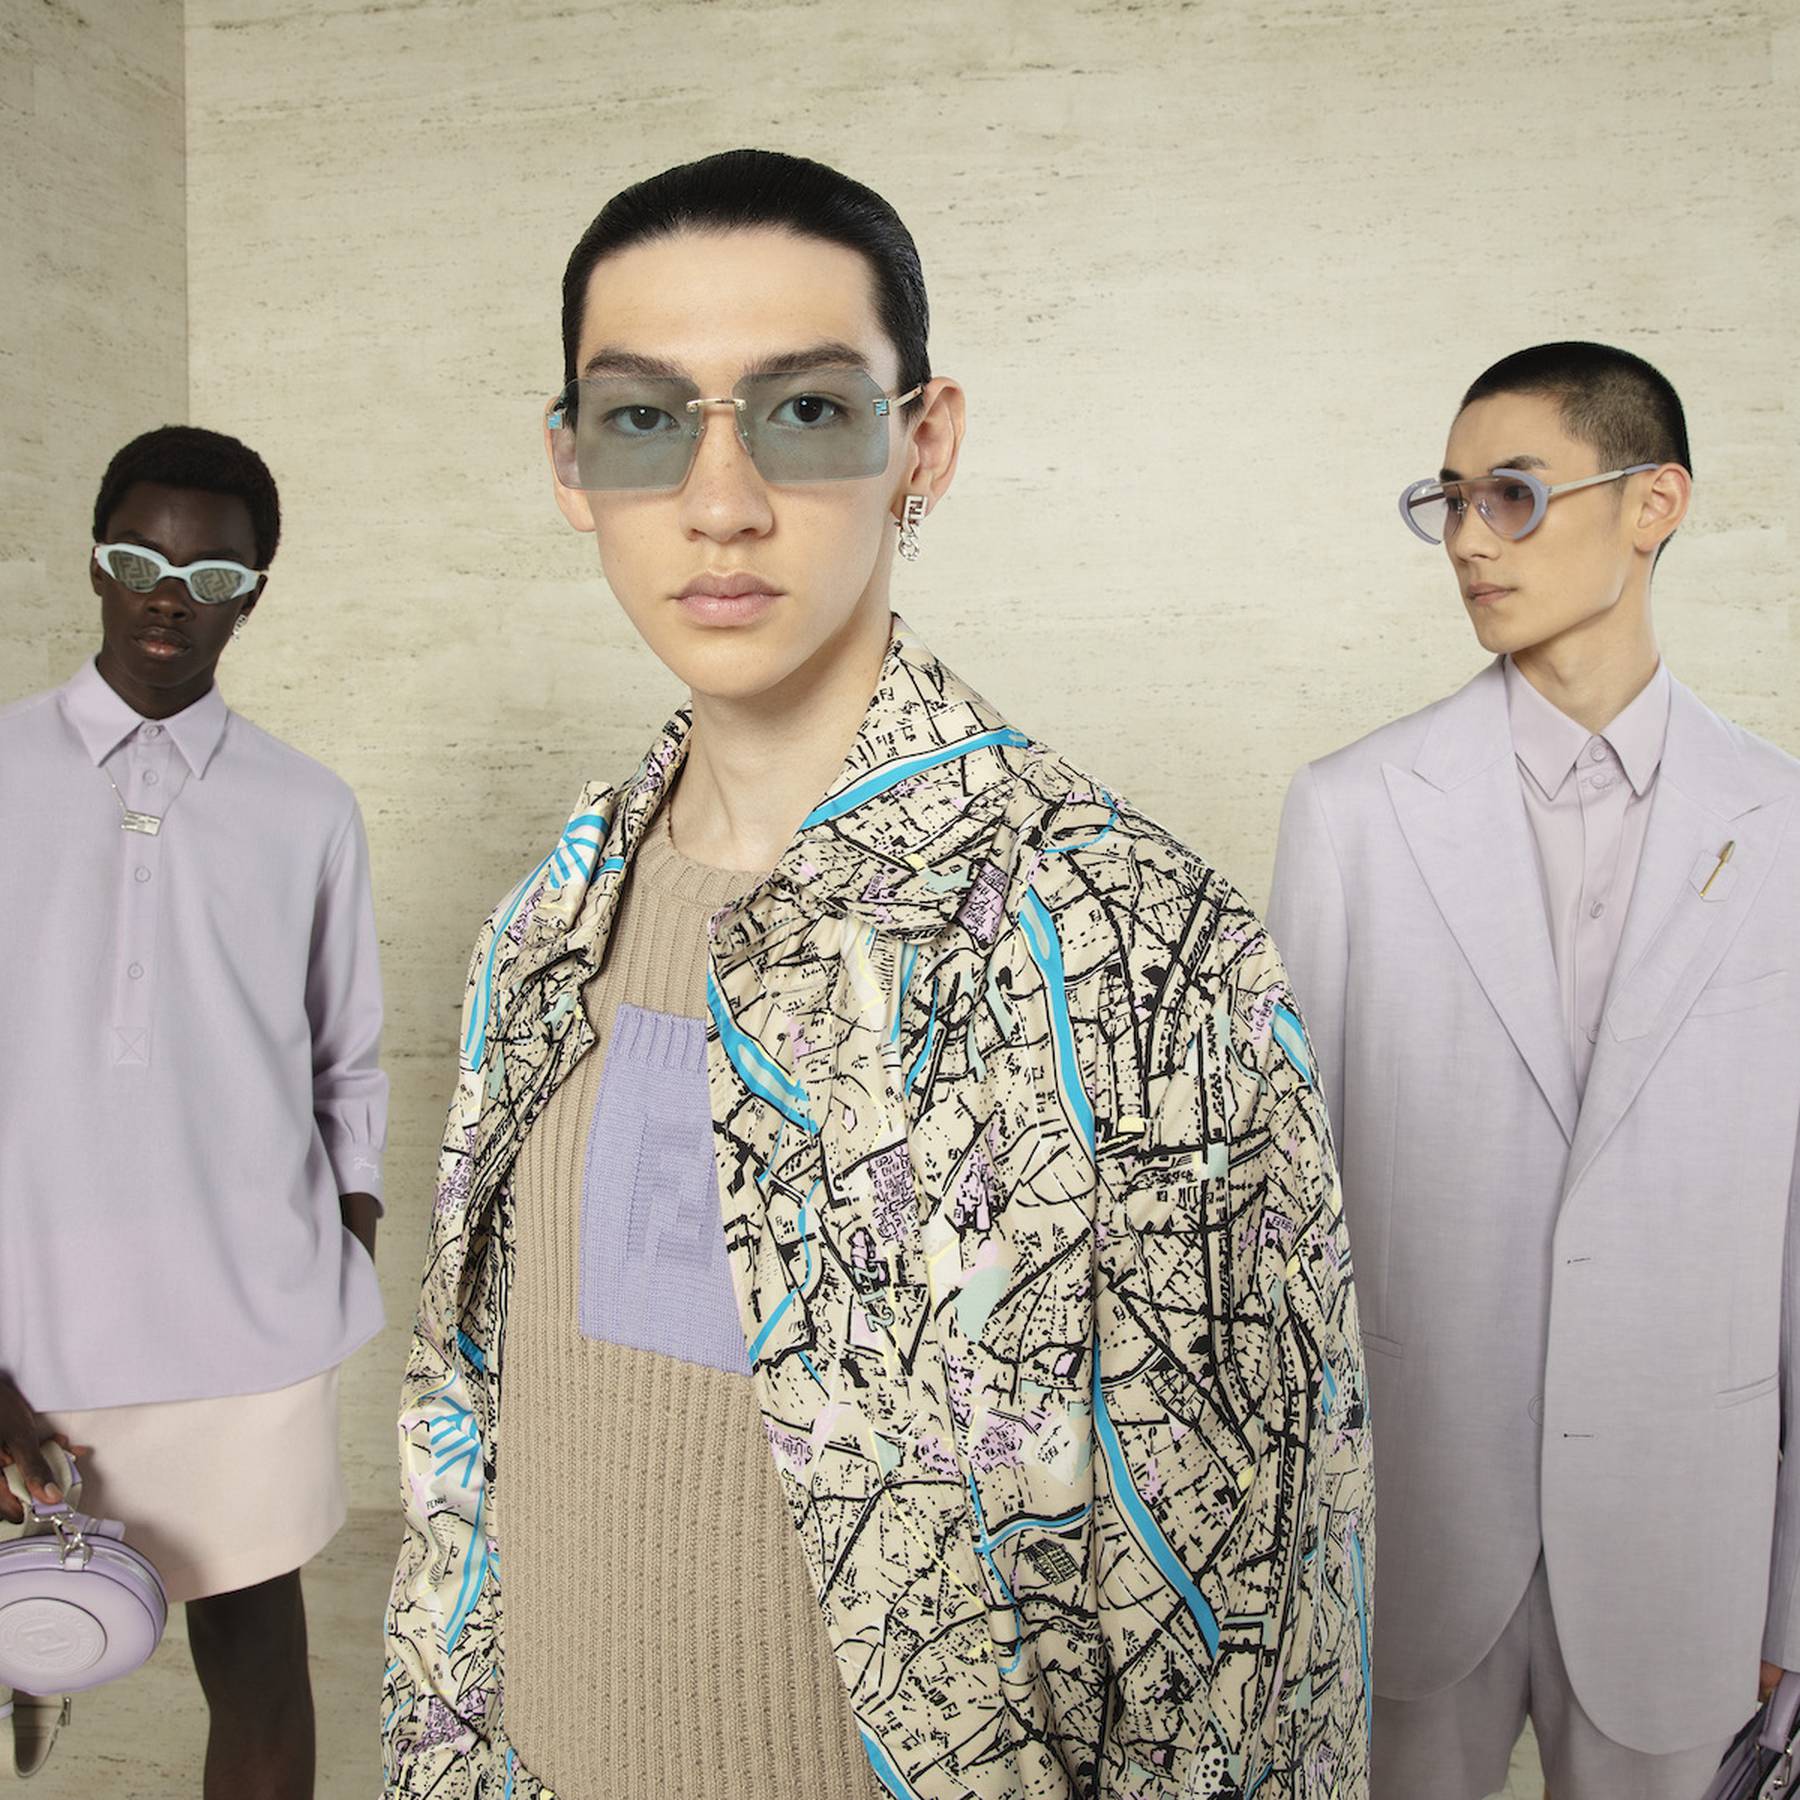 LVMH to take full of control of eyewear producer Thelios